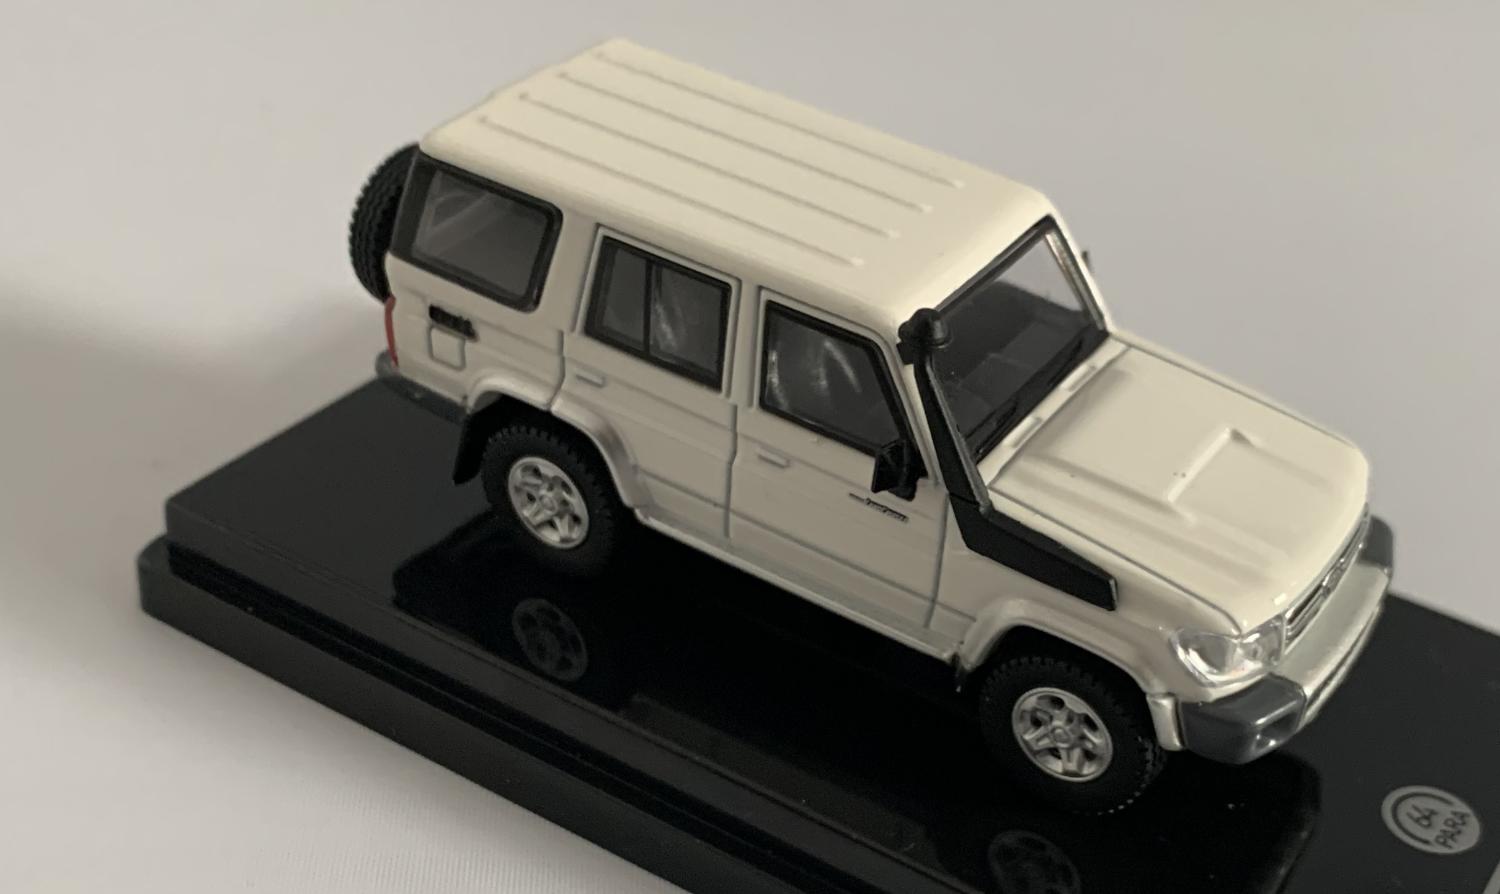 An excellent scale model of a Toyota Land Cruiser decorated in french vanilla with silver wheels,